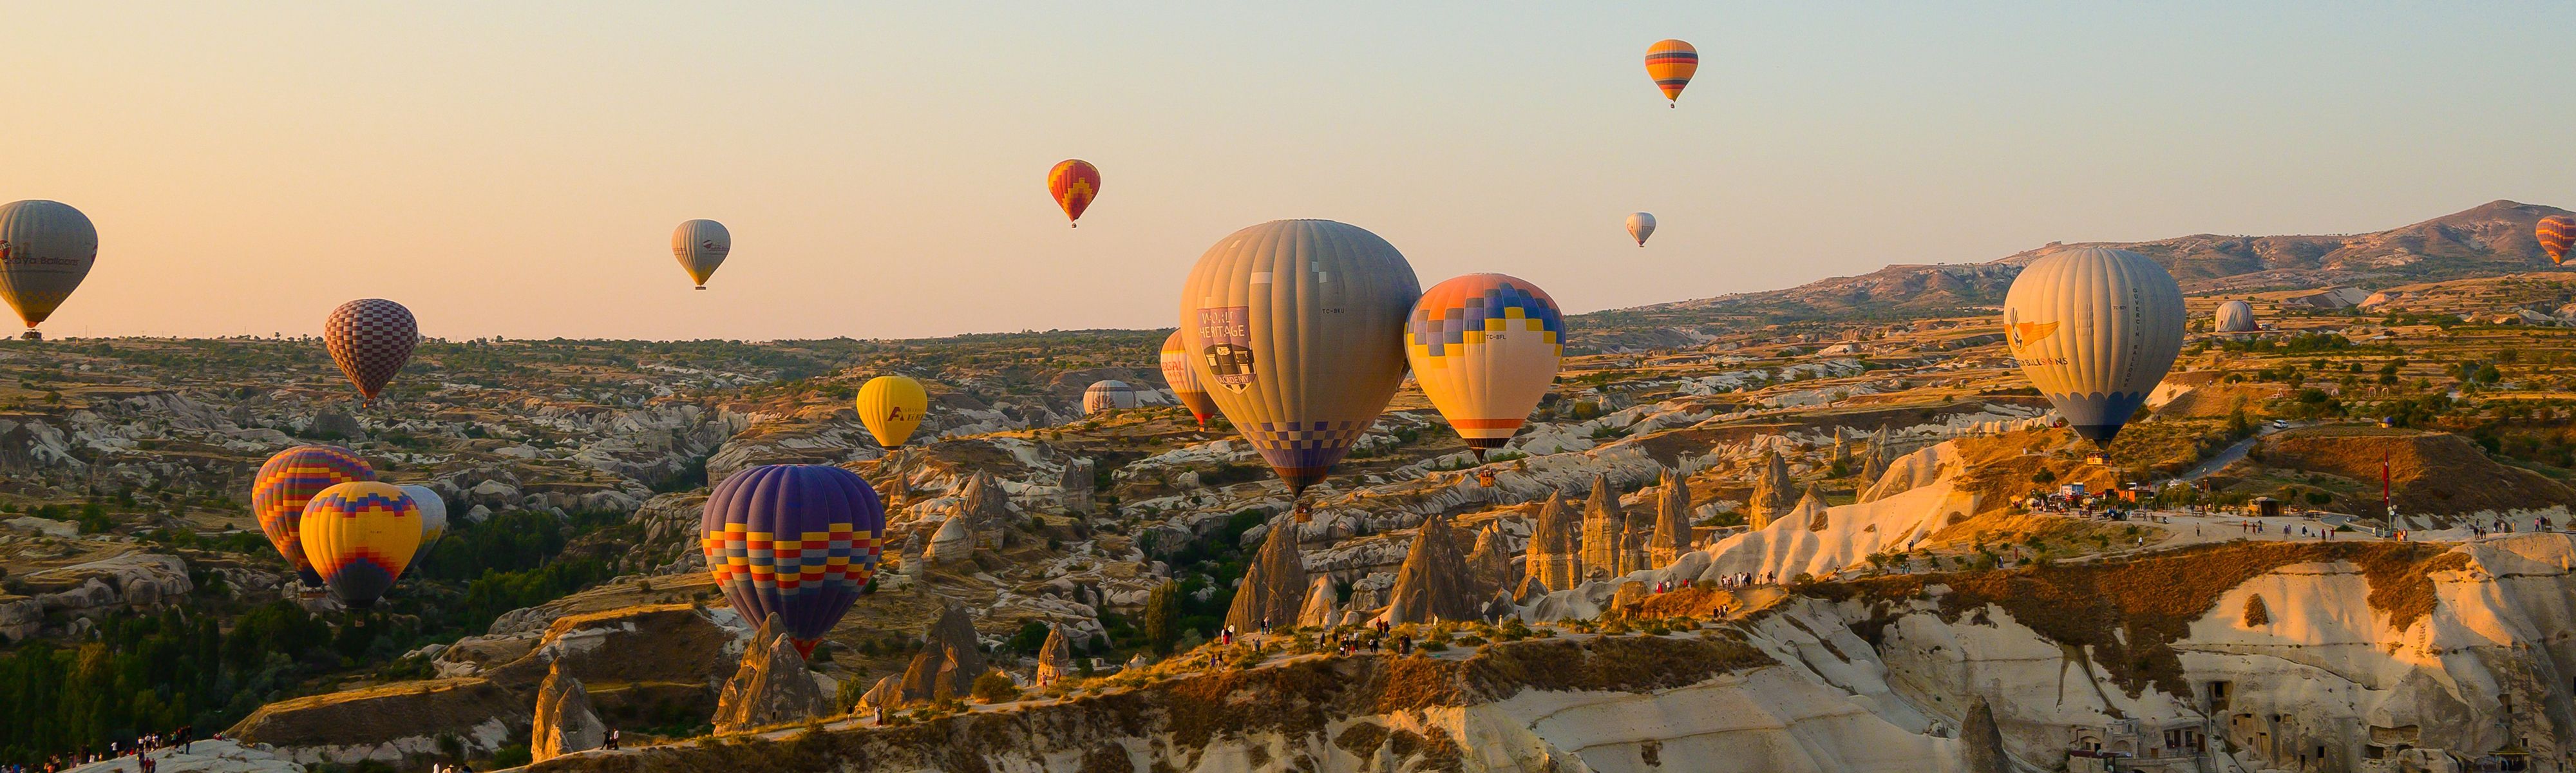 hot air balloons floating above mountains in turkey at sunset